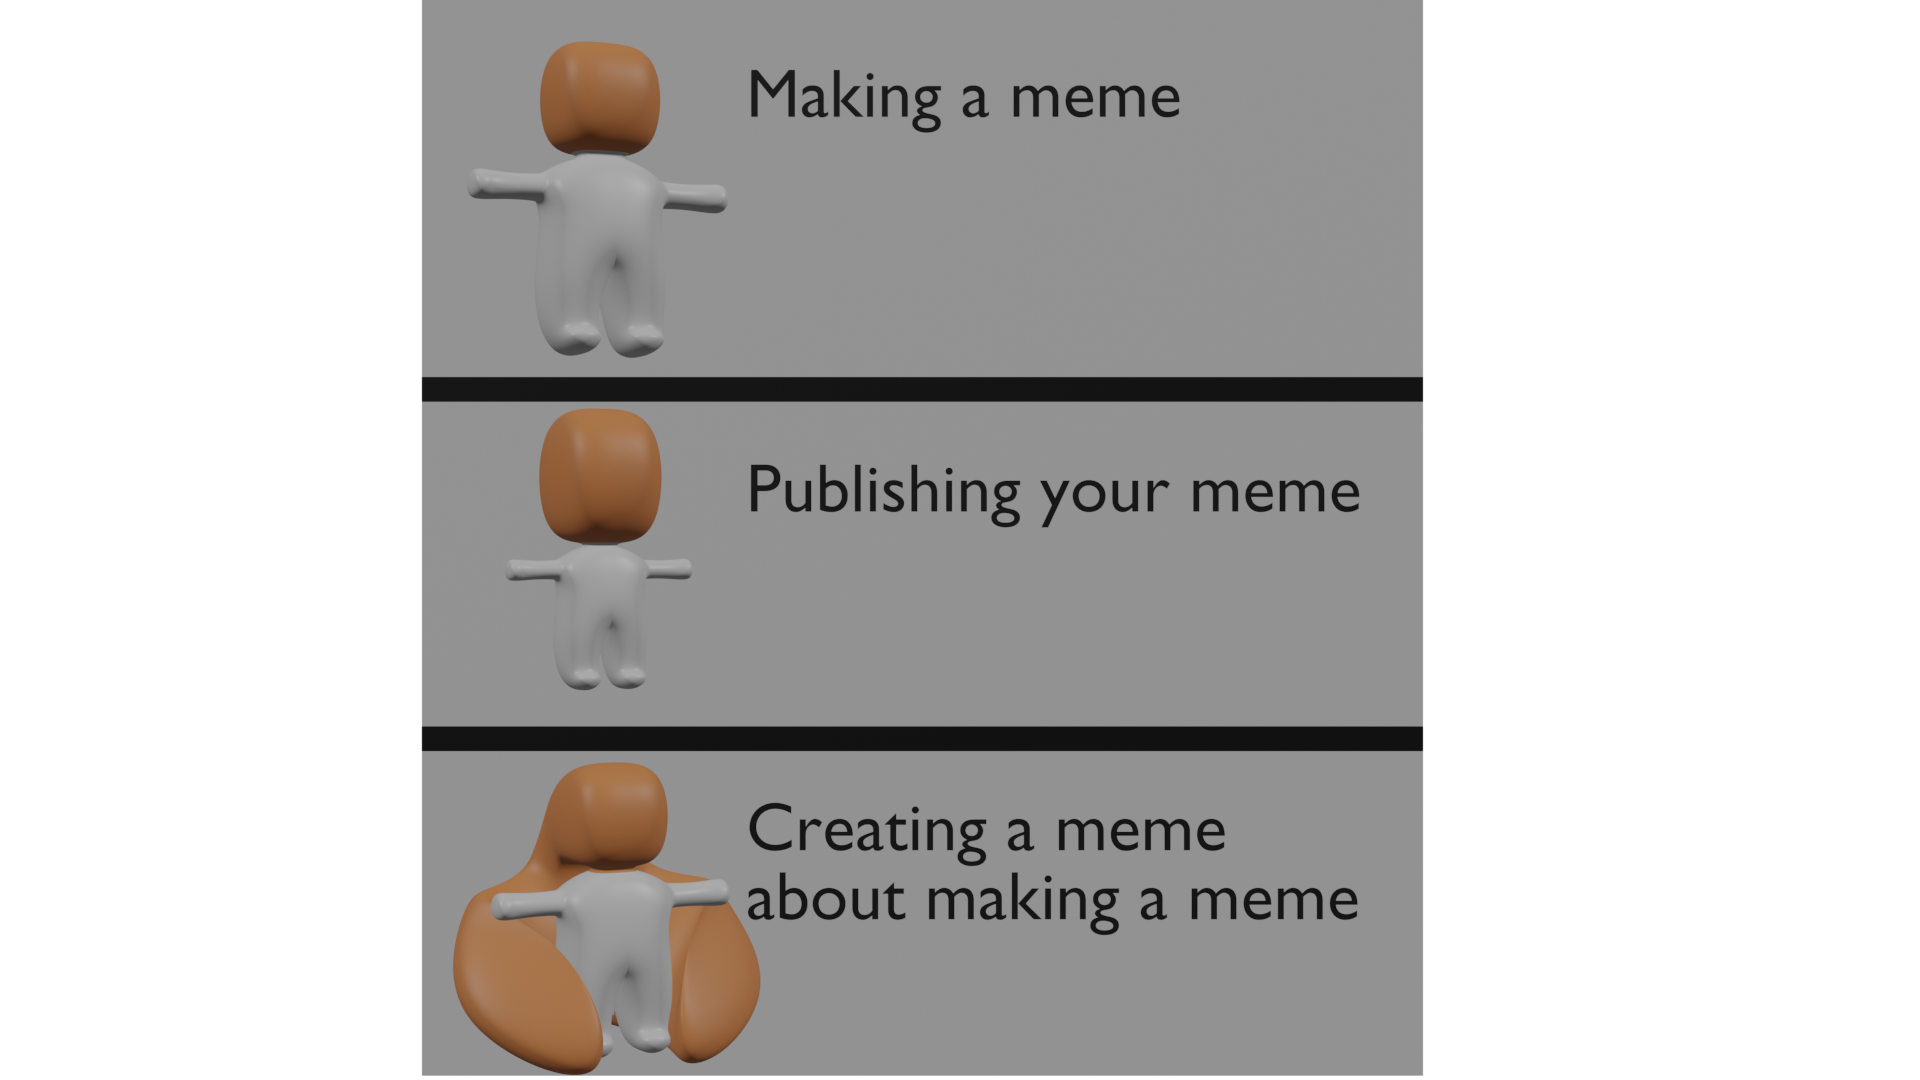 ../images/Meme-about-creating-a-meme-about-making-memes.png